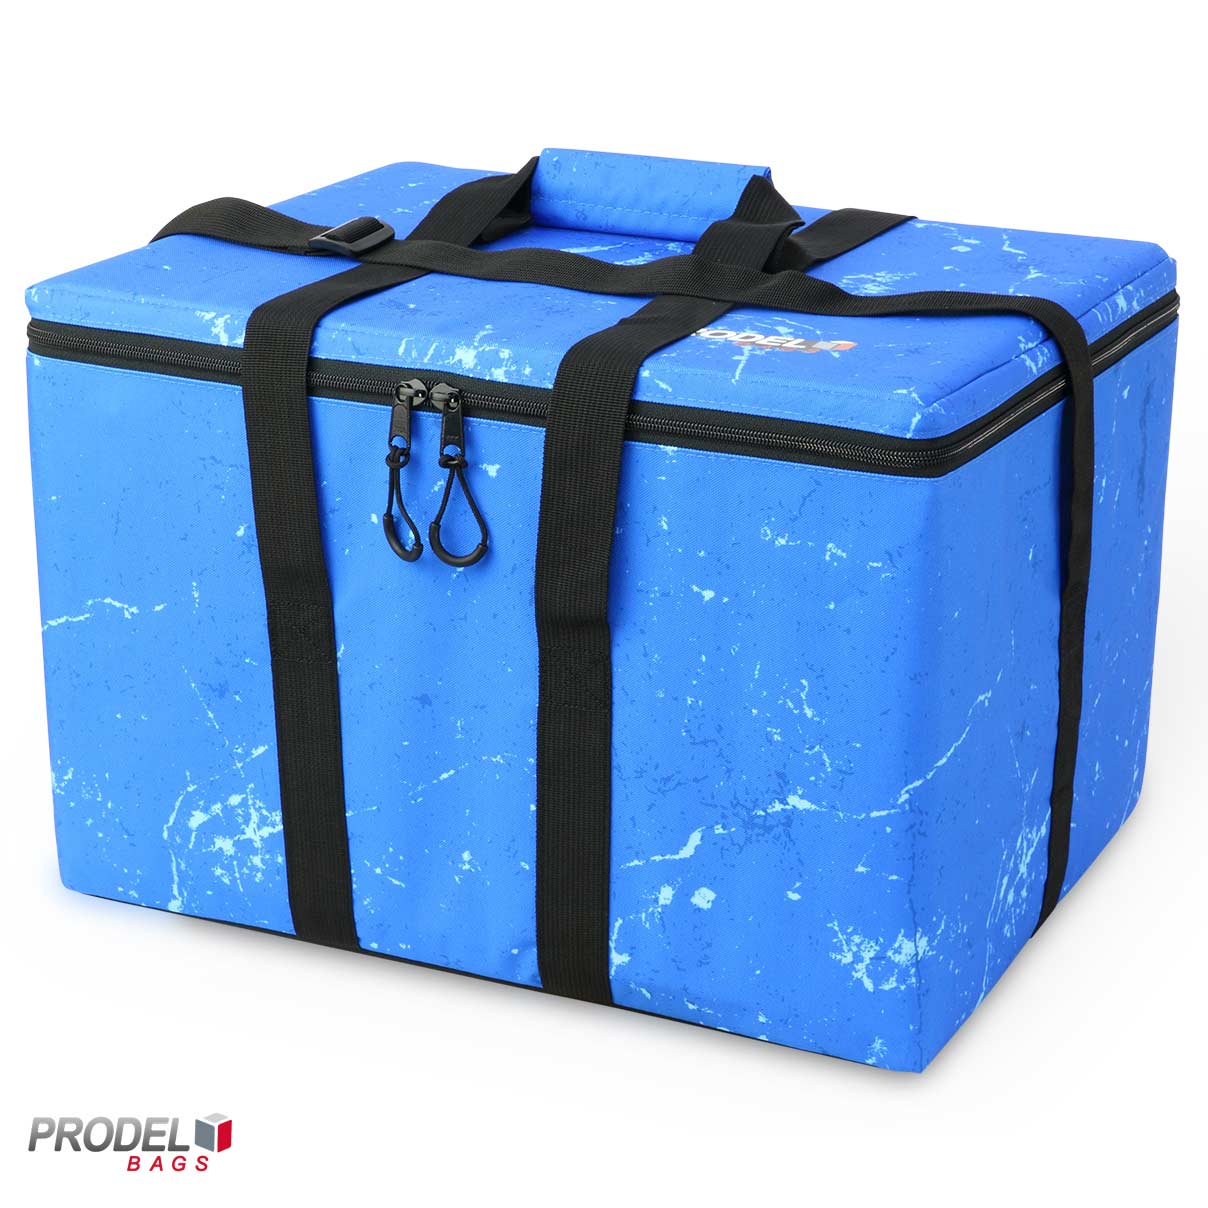 Insulated Bag For Frozen Food Discount - www.edoc.com.vn 1694903582